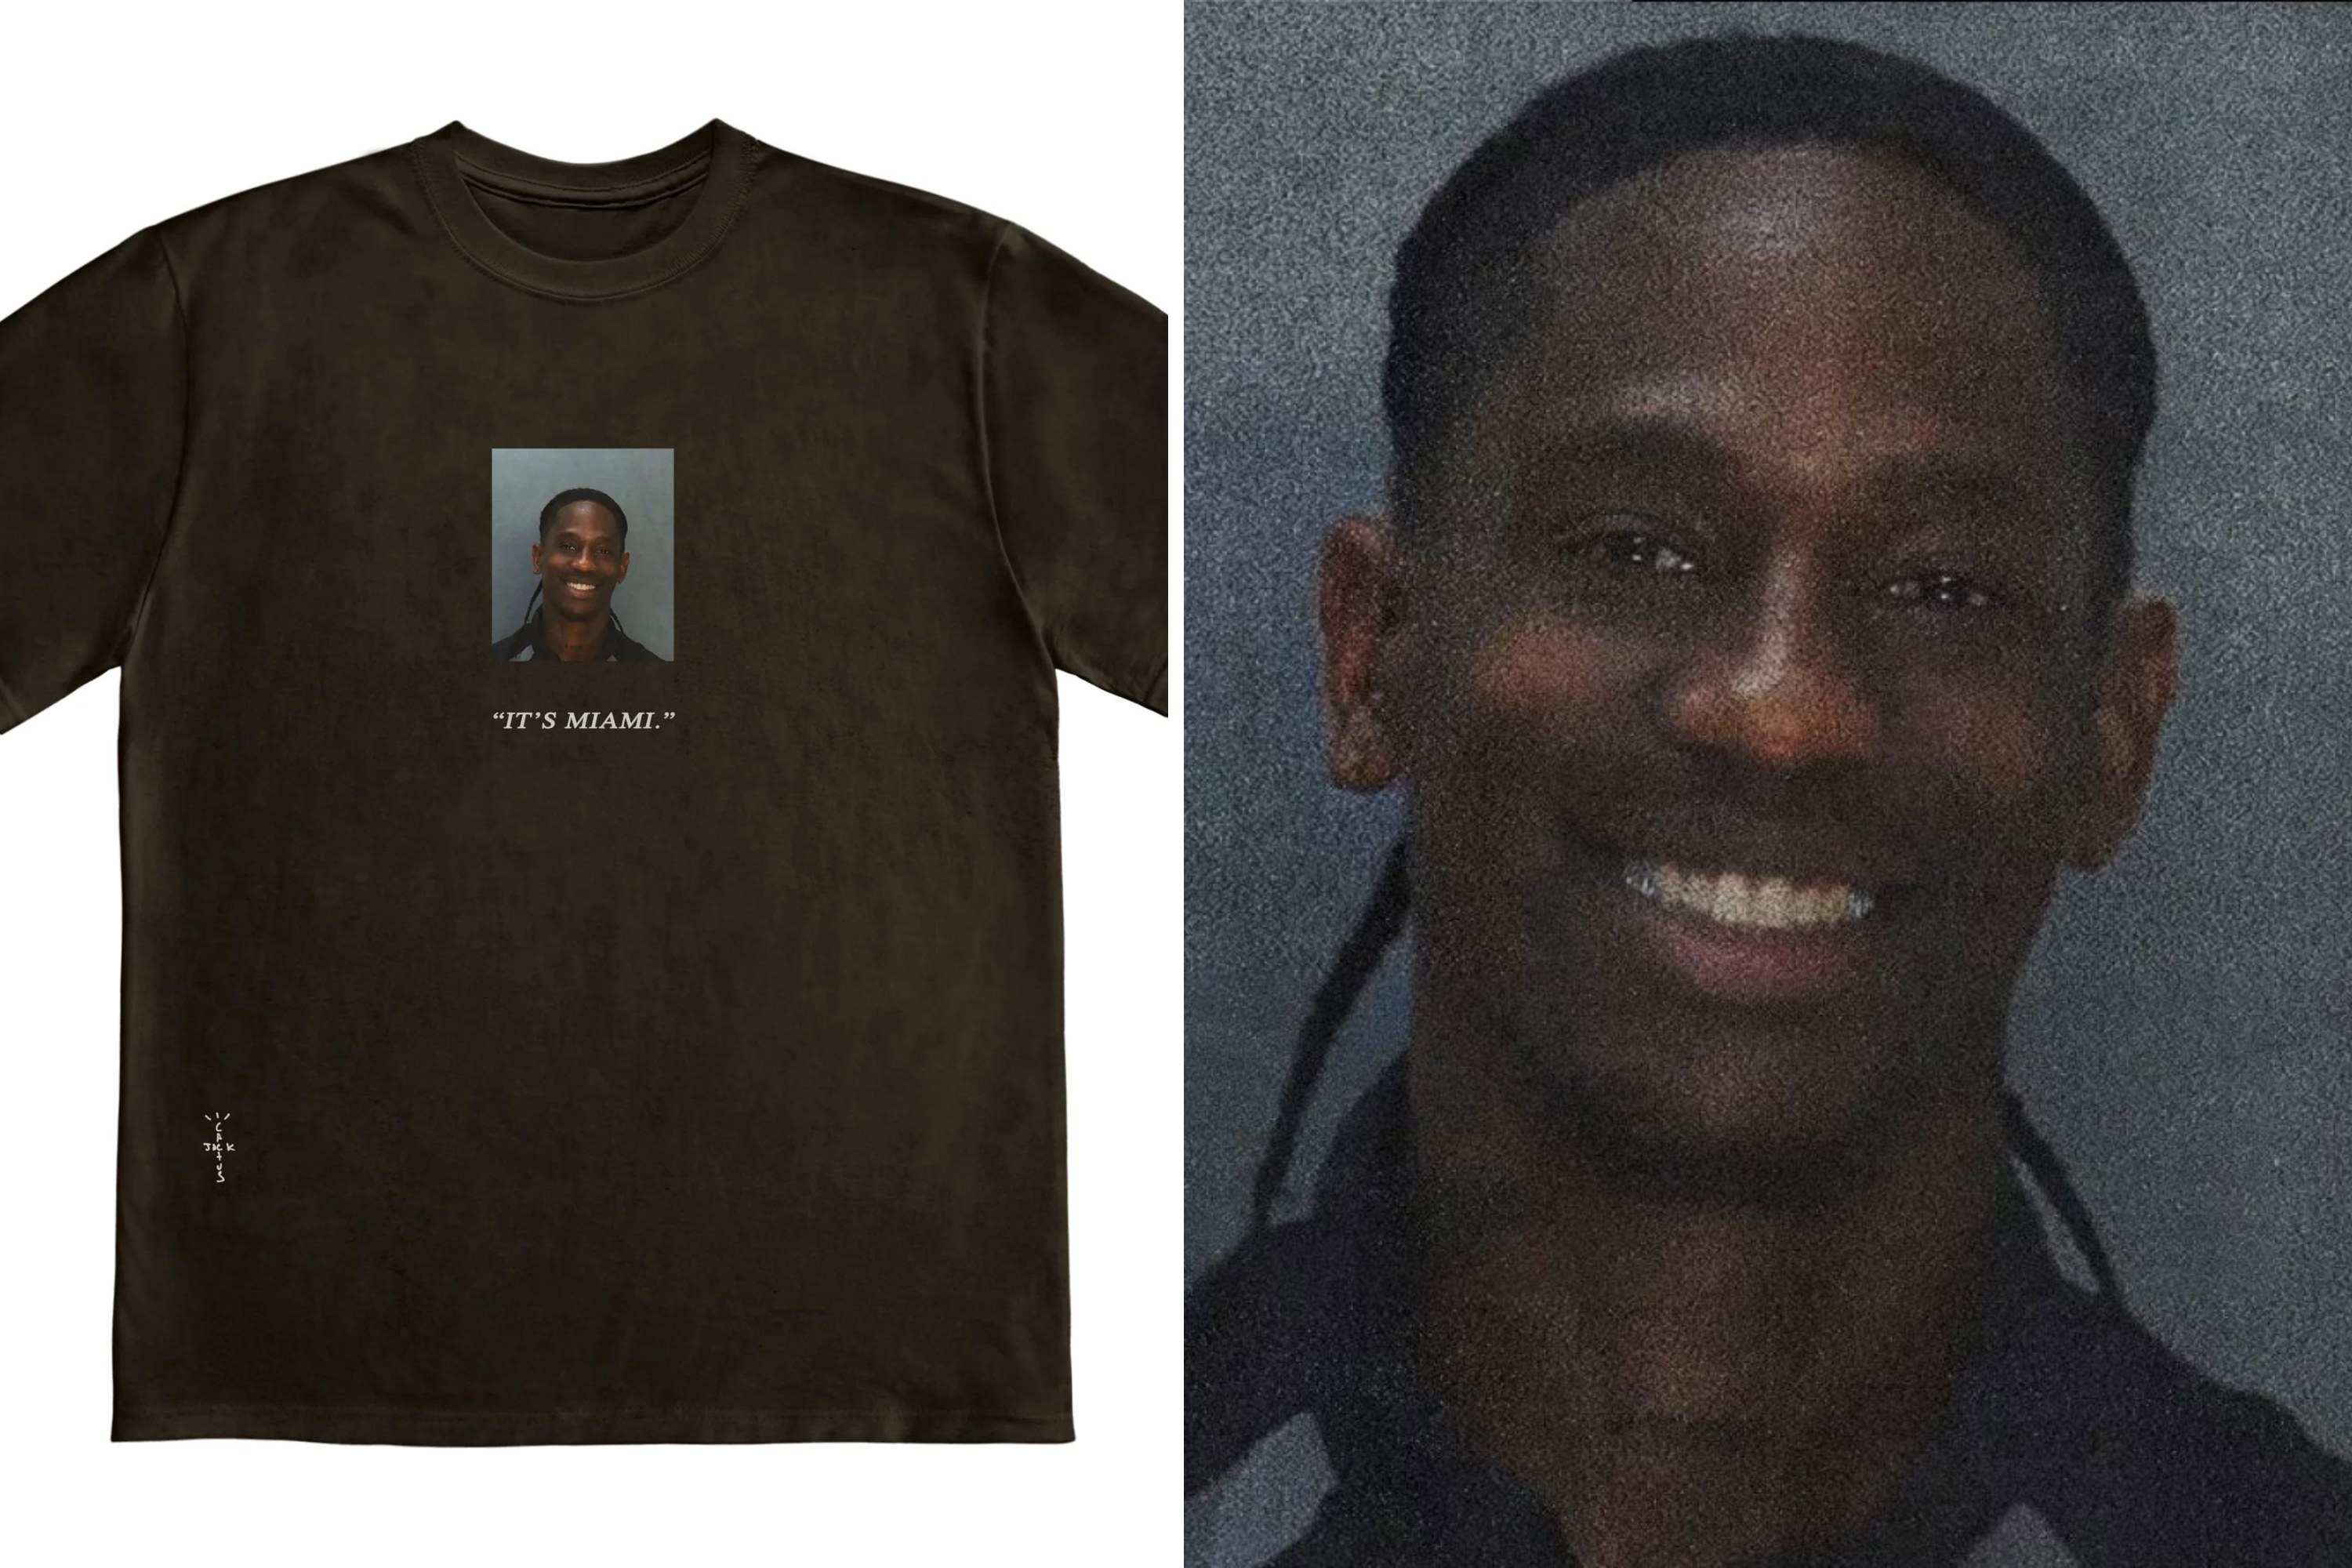 Rapper Travis Scott selling T-shirts featuring his mugshot after his recent arrest for disorderly intoxication and trespassing in Miami